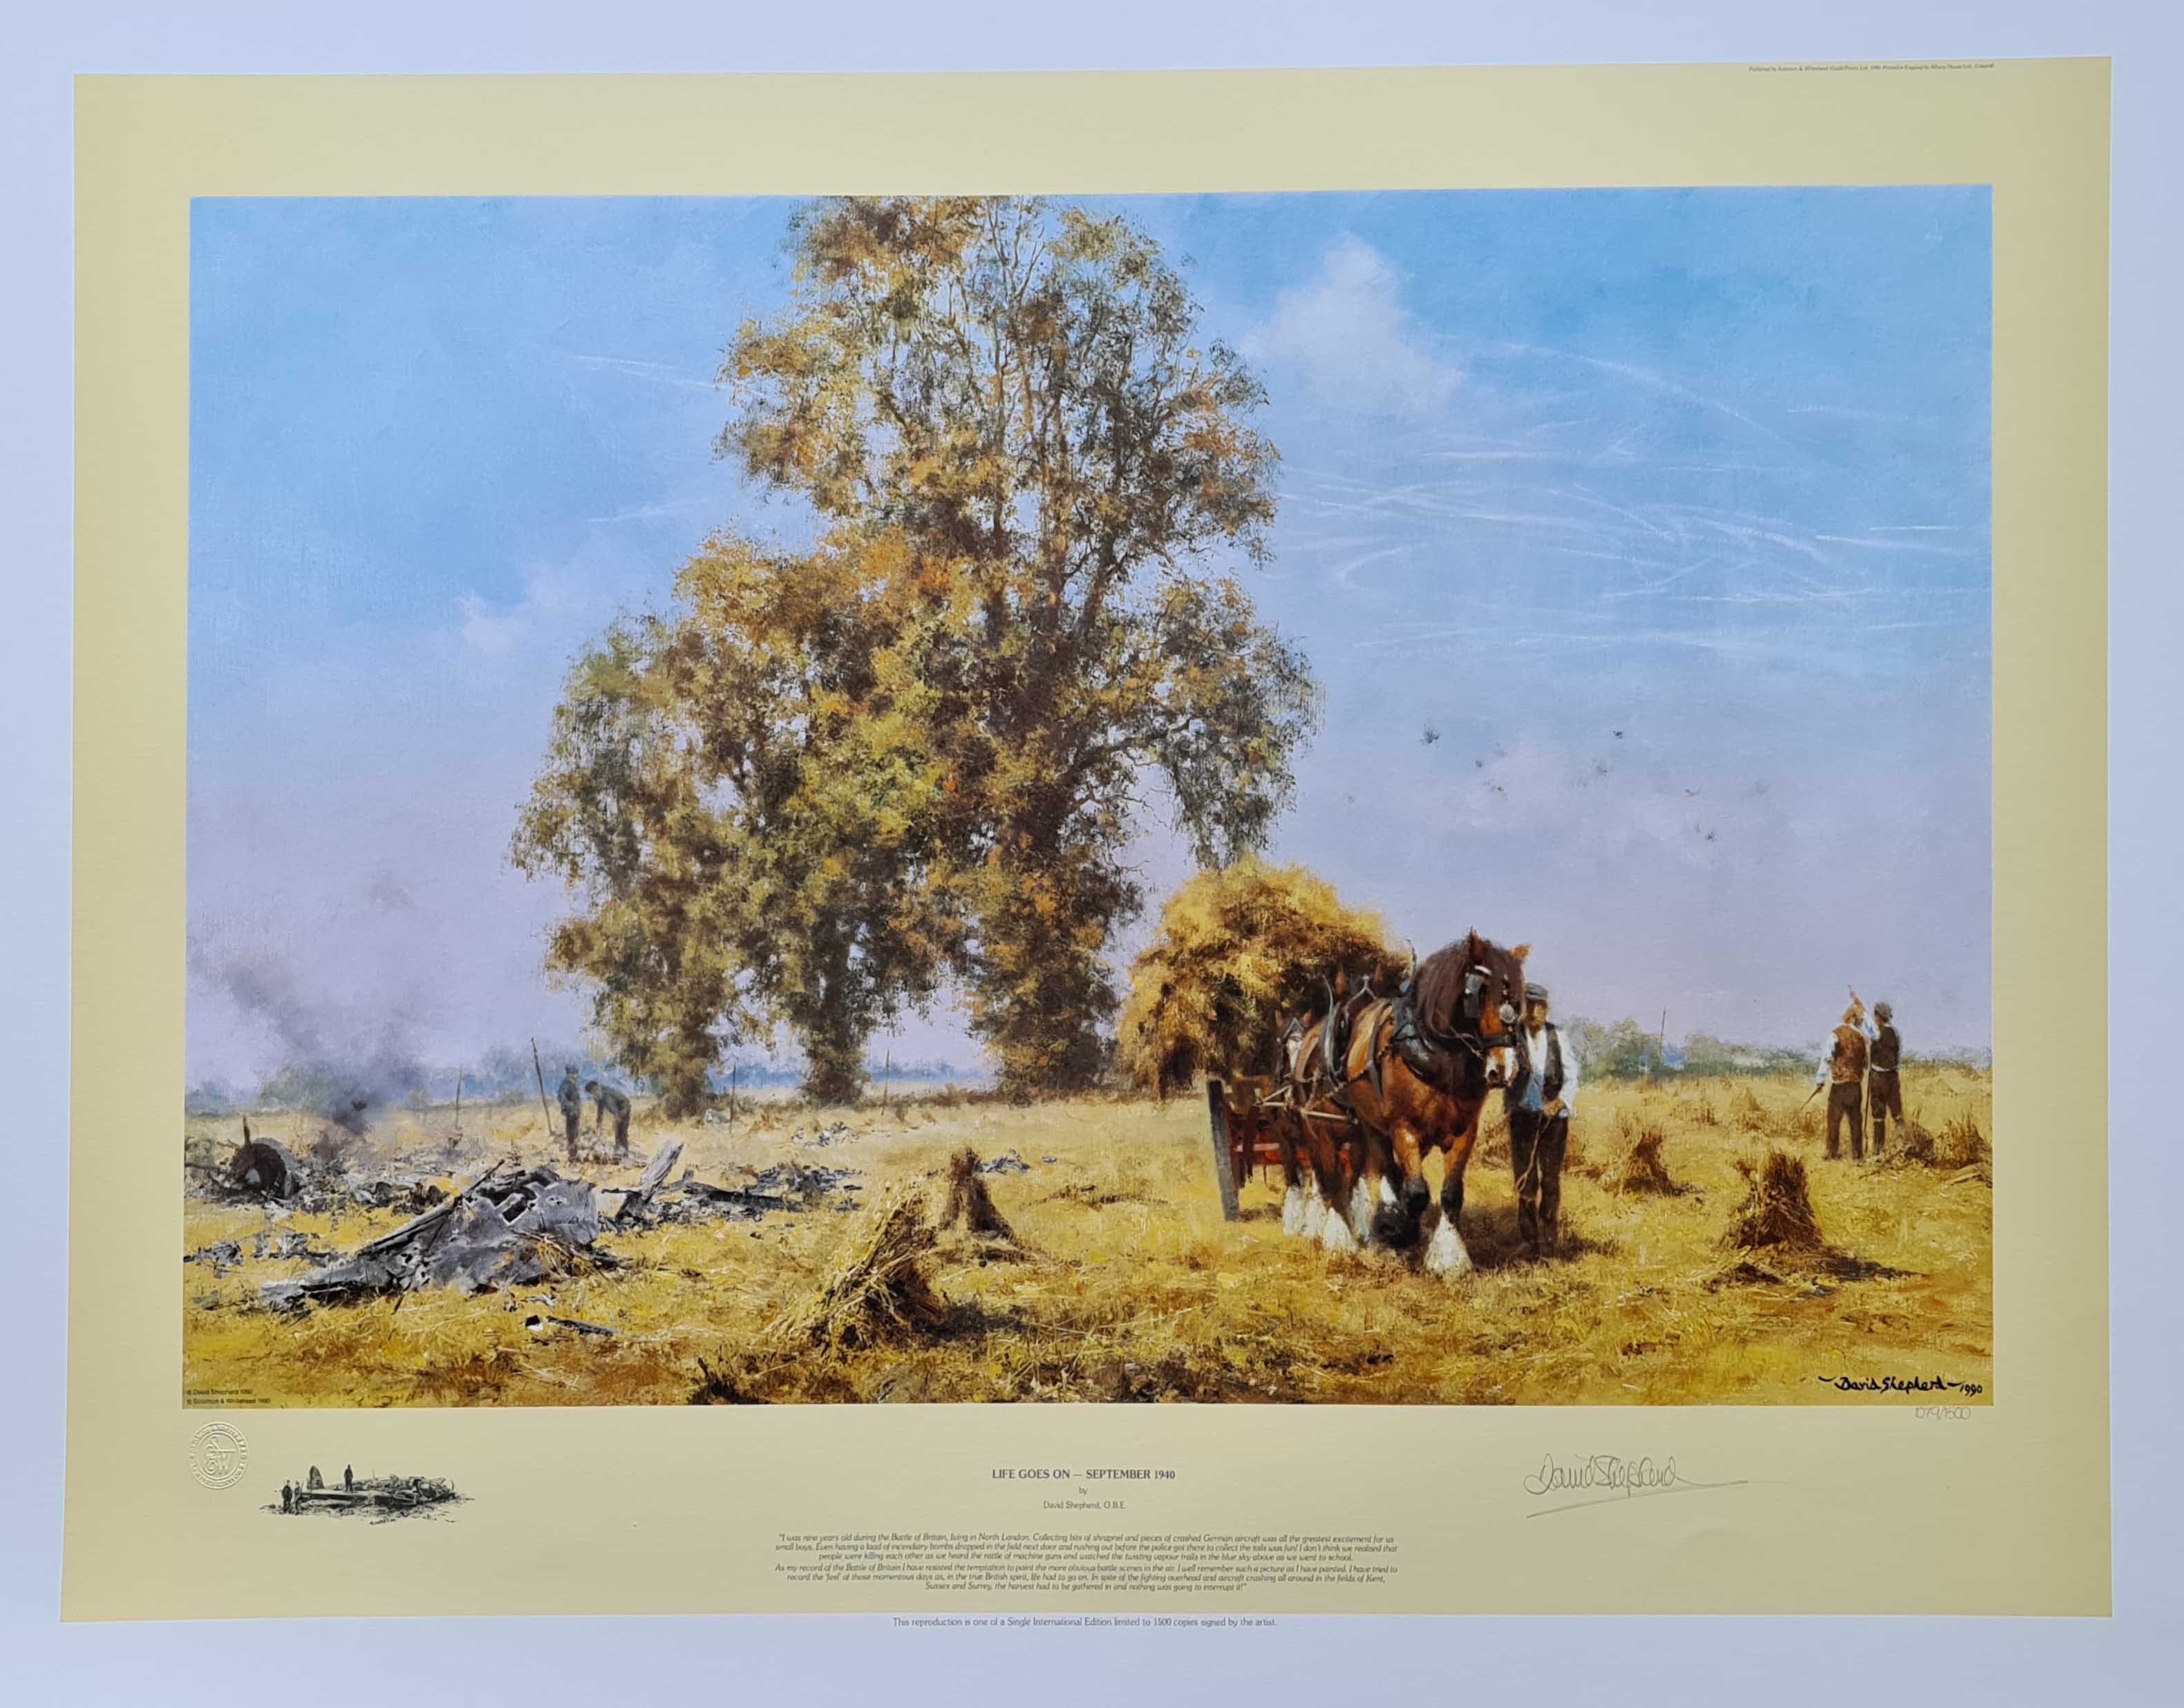 david shepherd, Life goes on, signed limited edition print